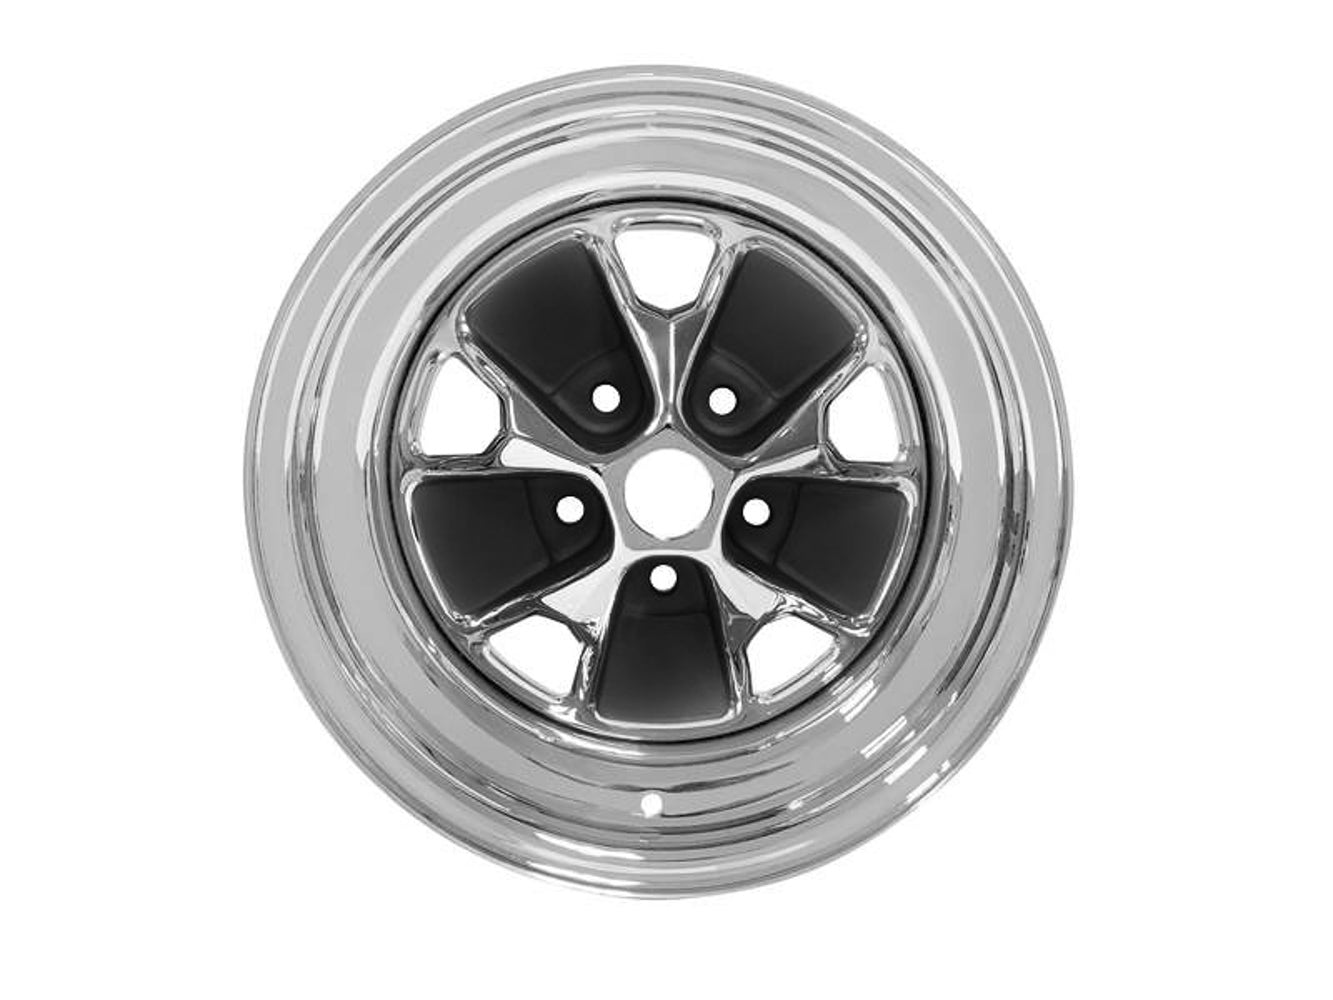 Drake Automotive Group 14 x 7 Mustang Styled Steel Wheel Charcoal DRAC5ZZ-1007-BR